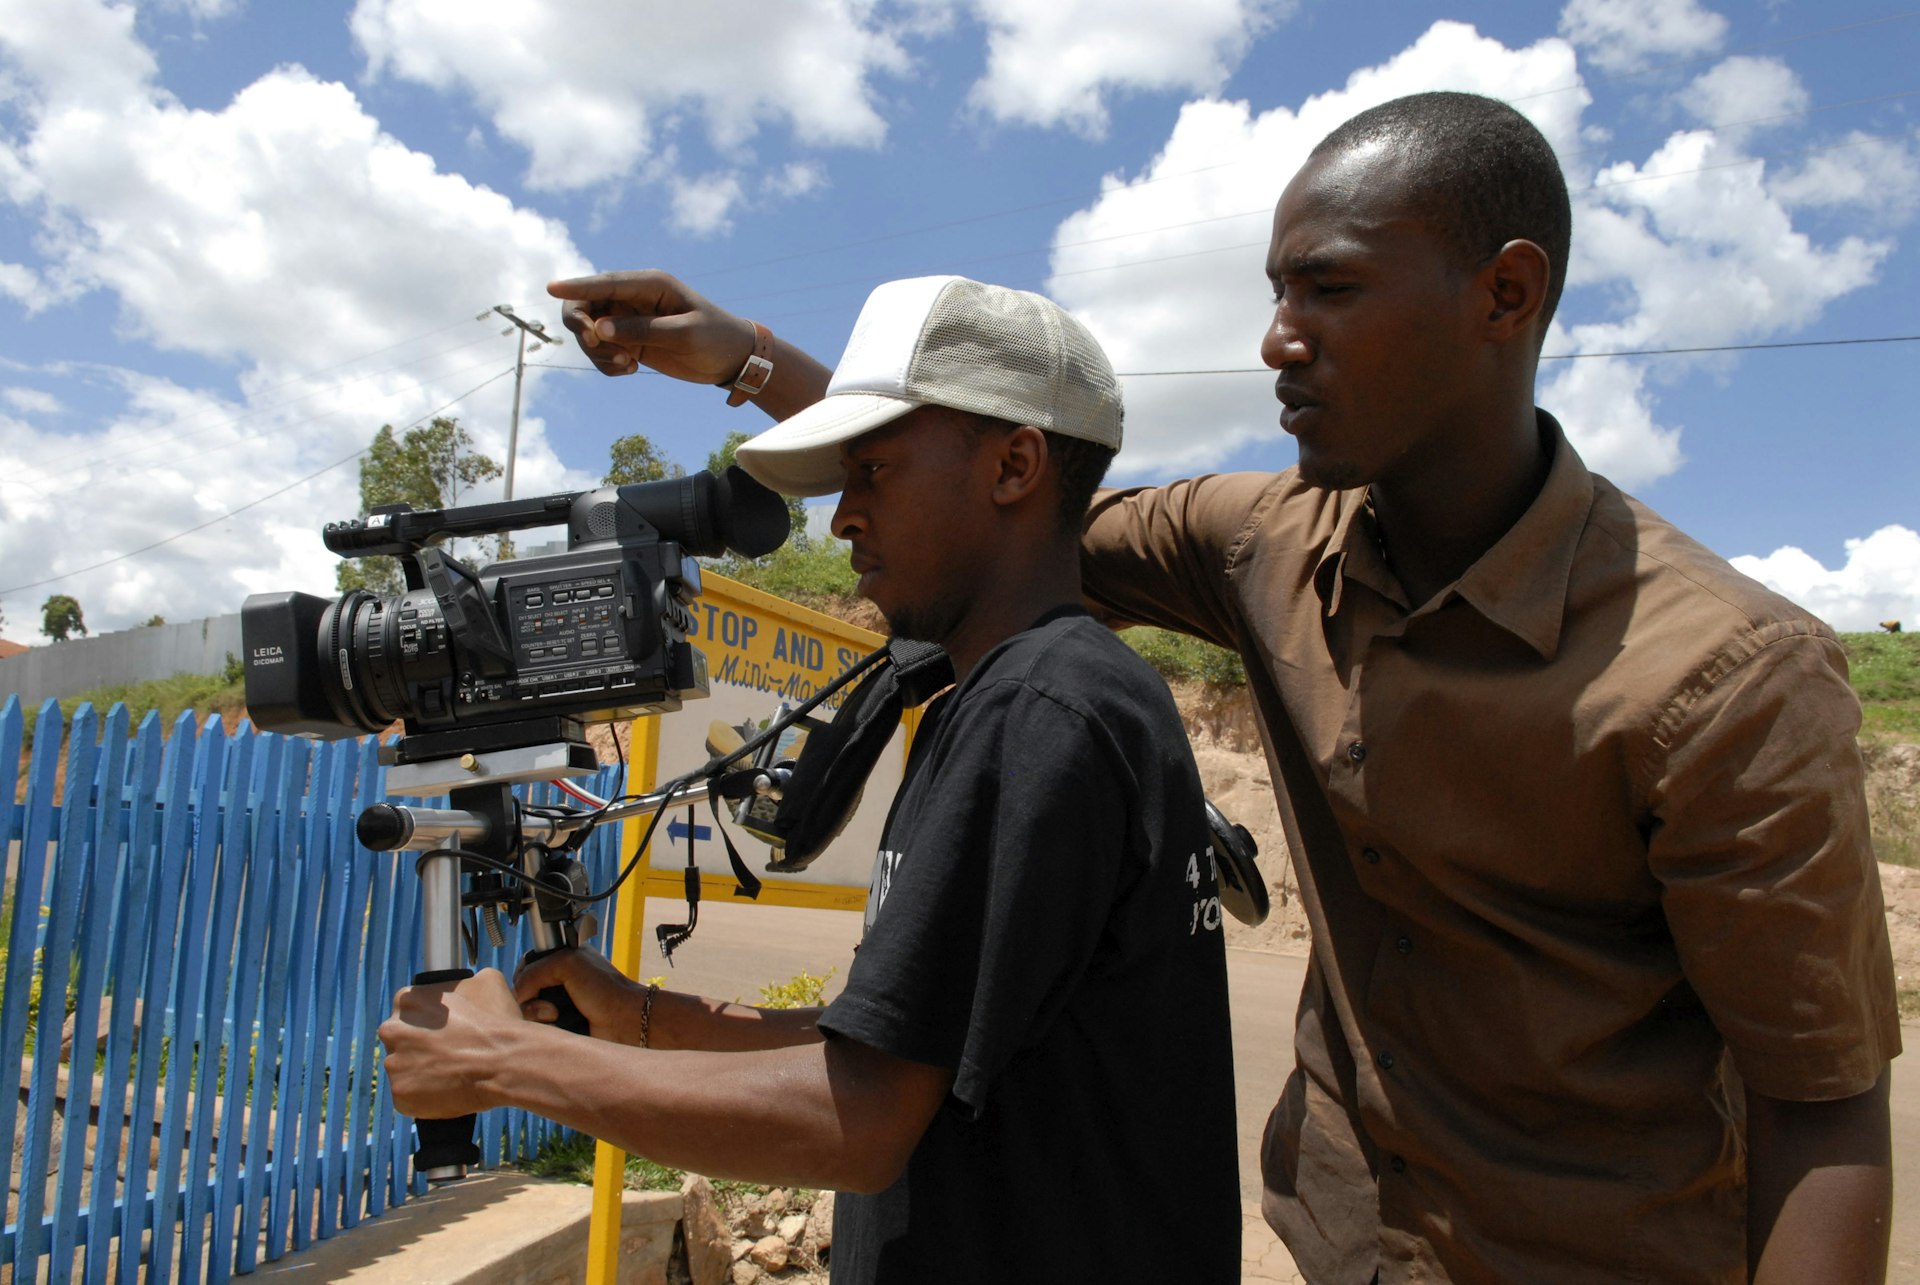 Rwandan cinema is healing wounds in a country scarred by genocide